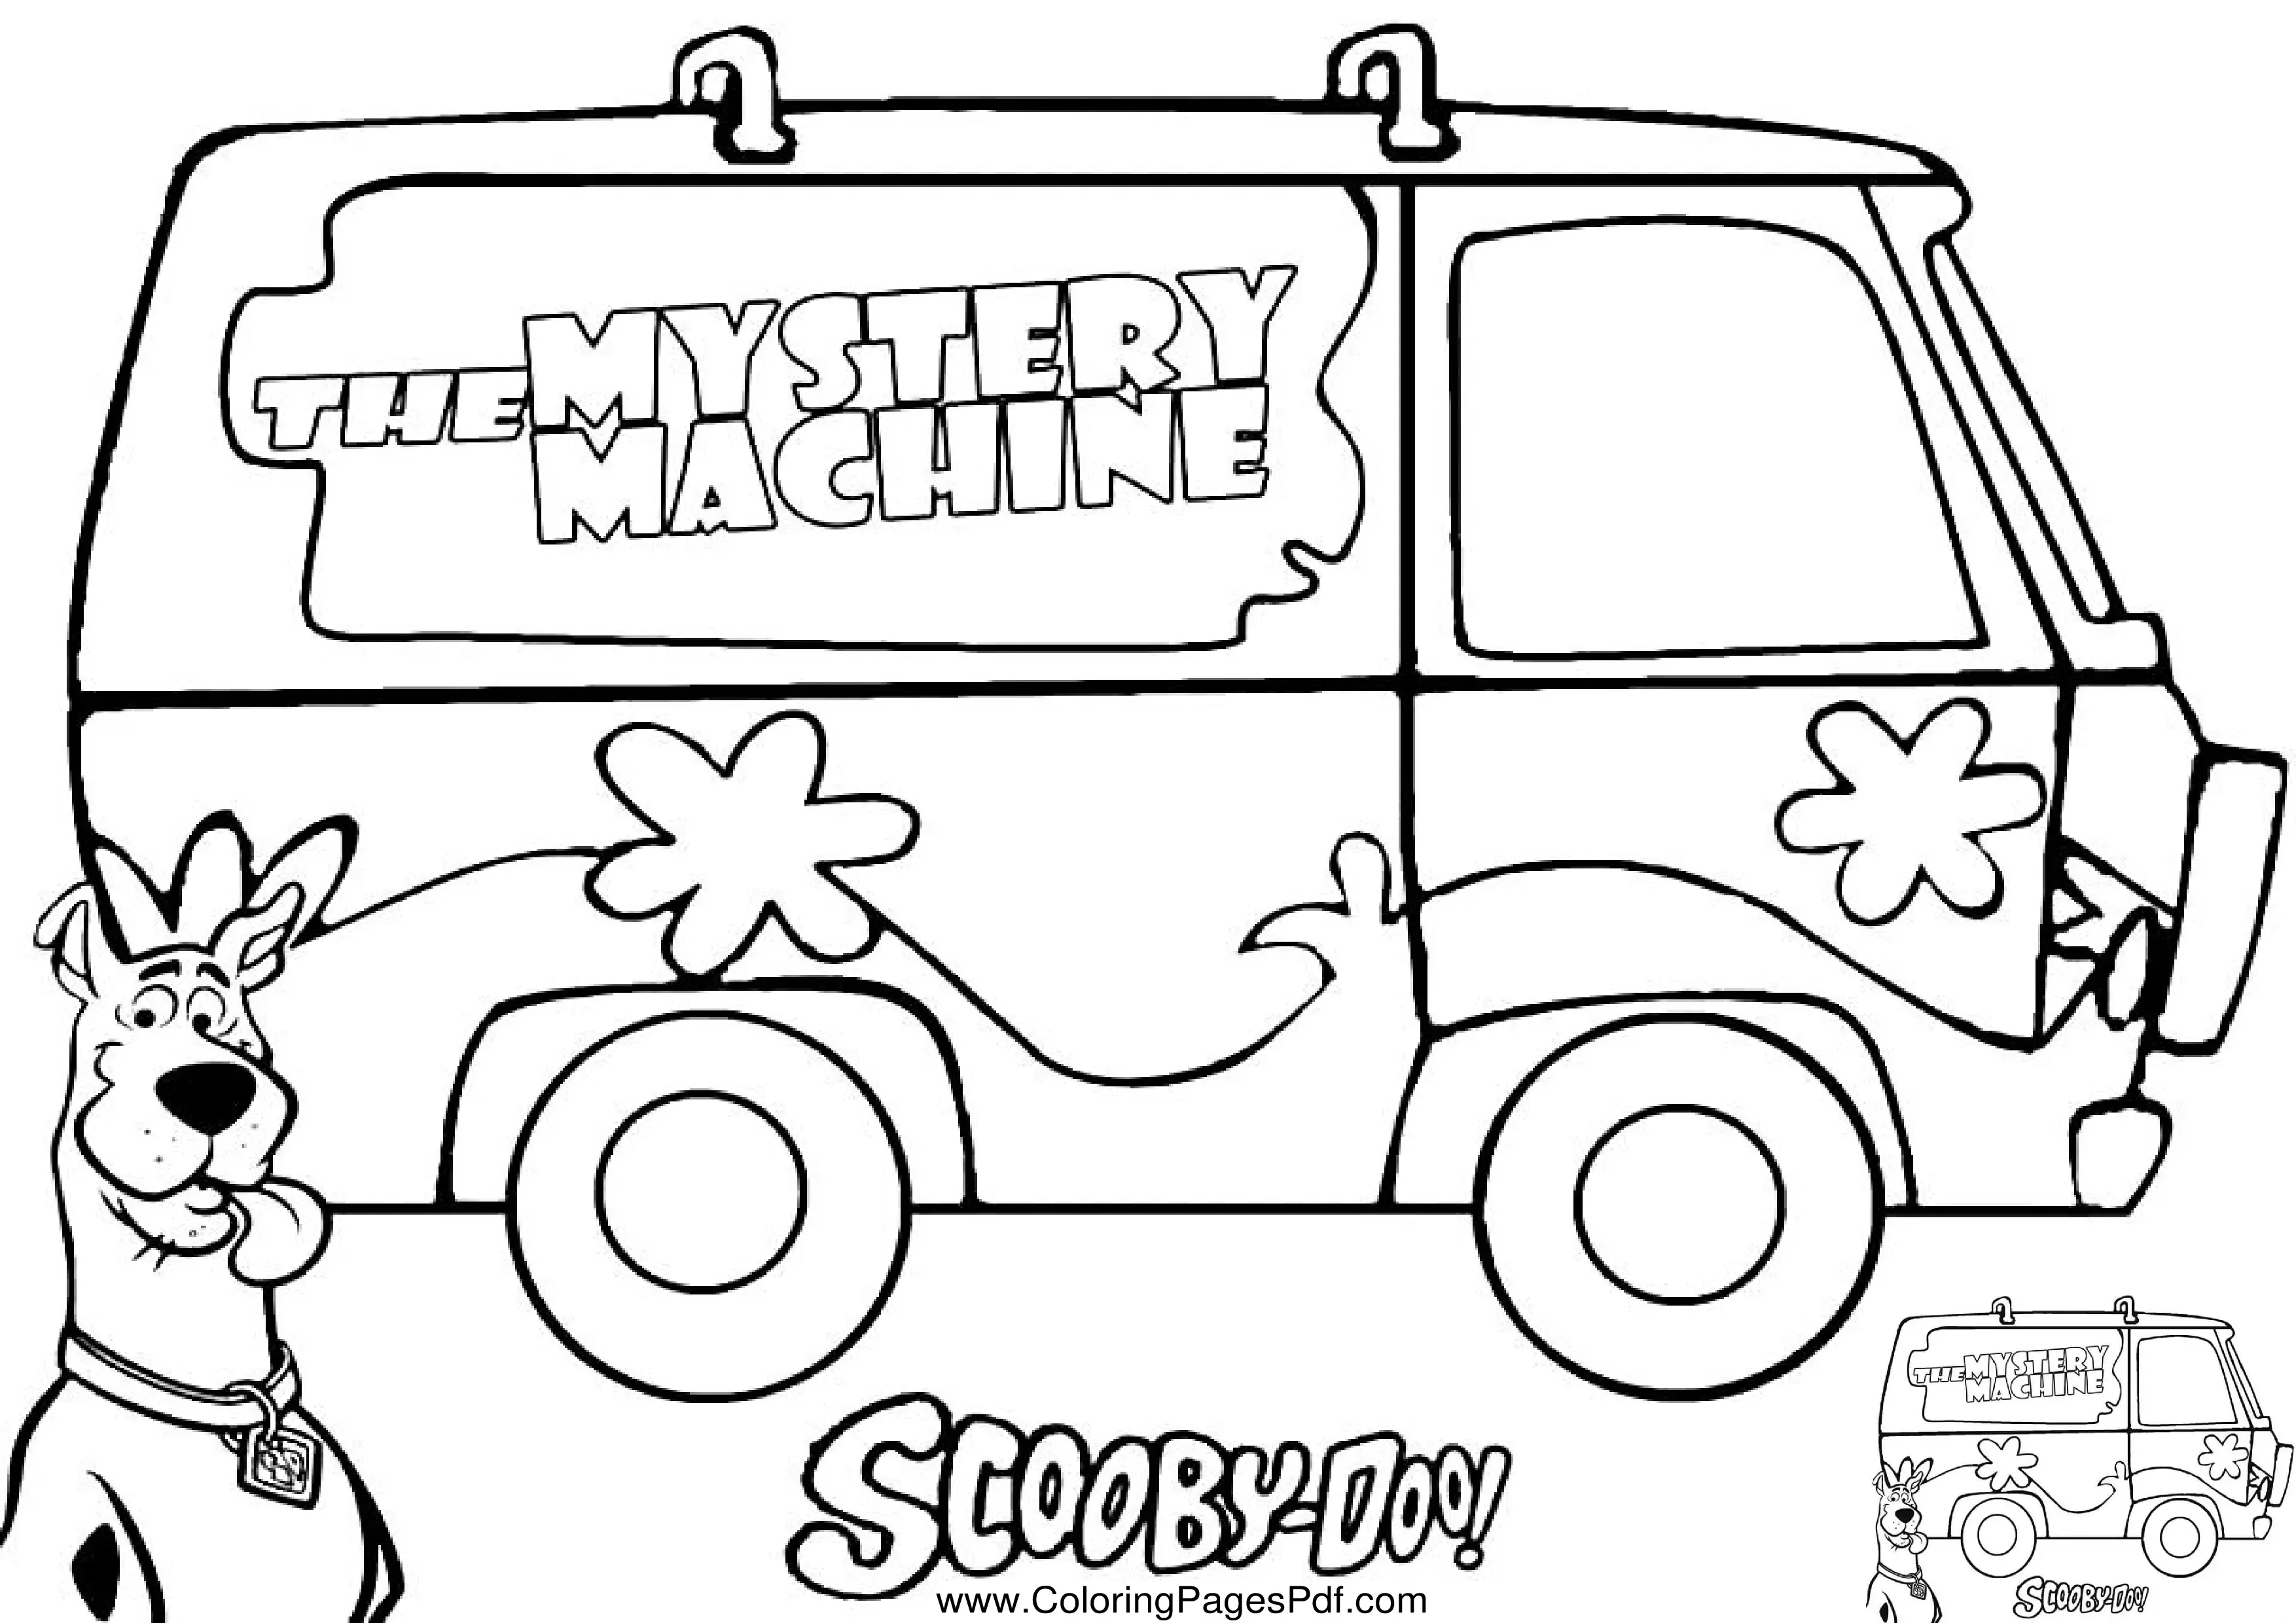 Scooby doo coloring pages mystery machine